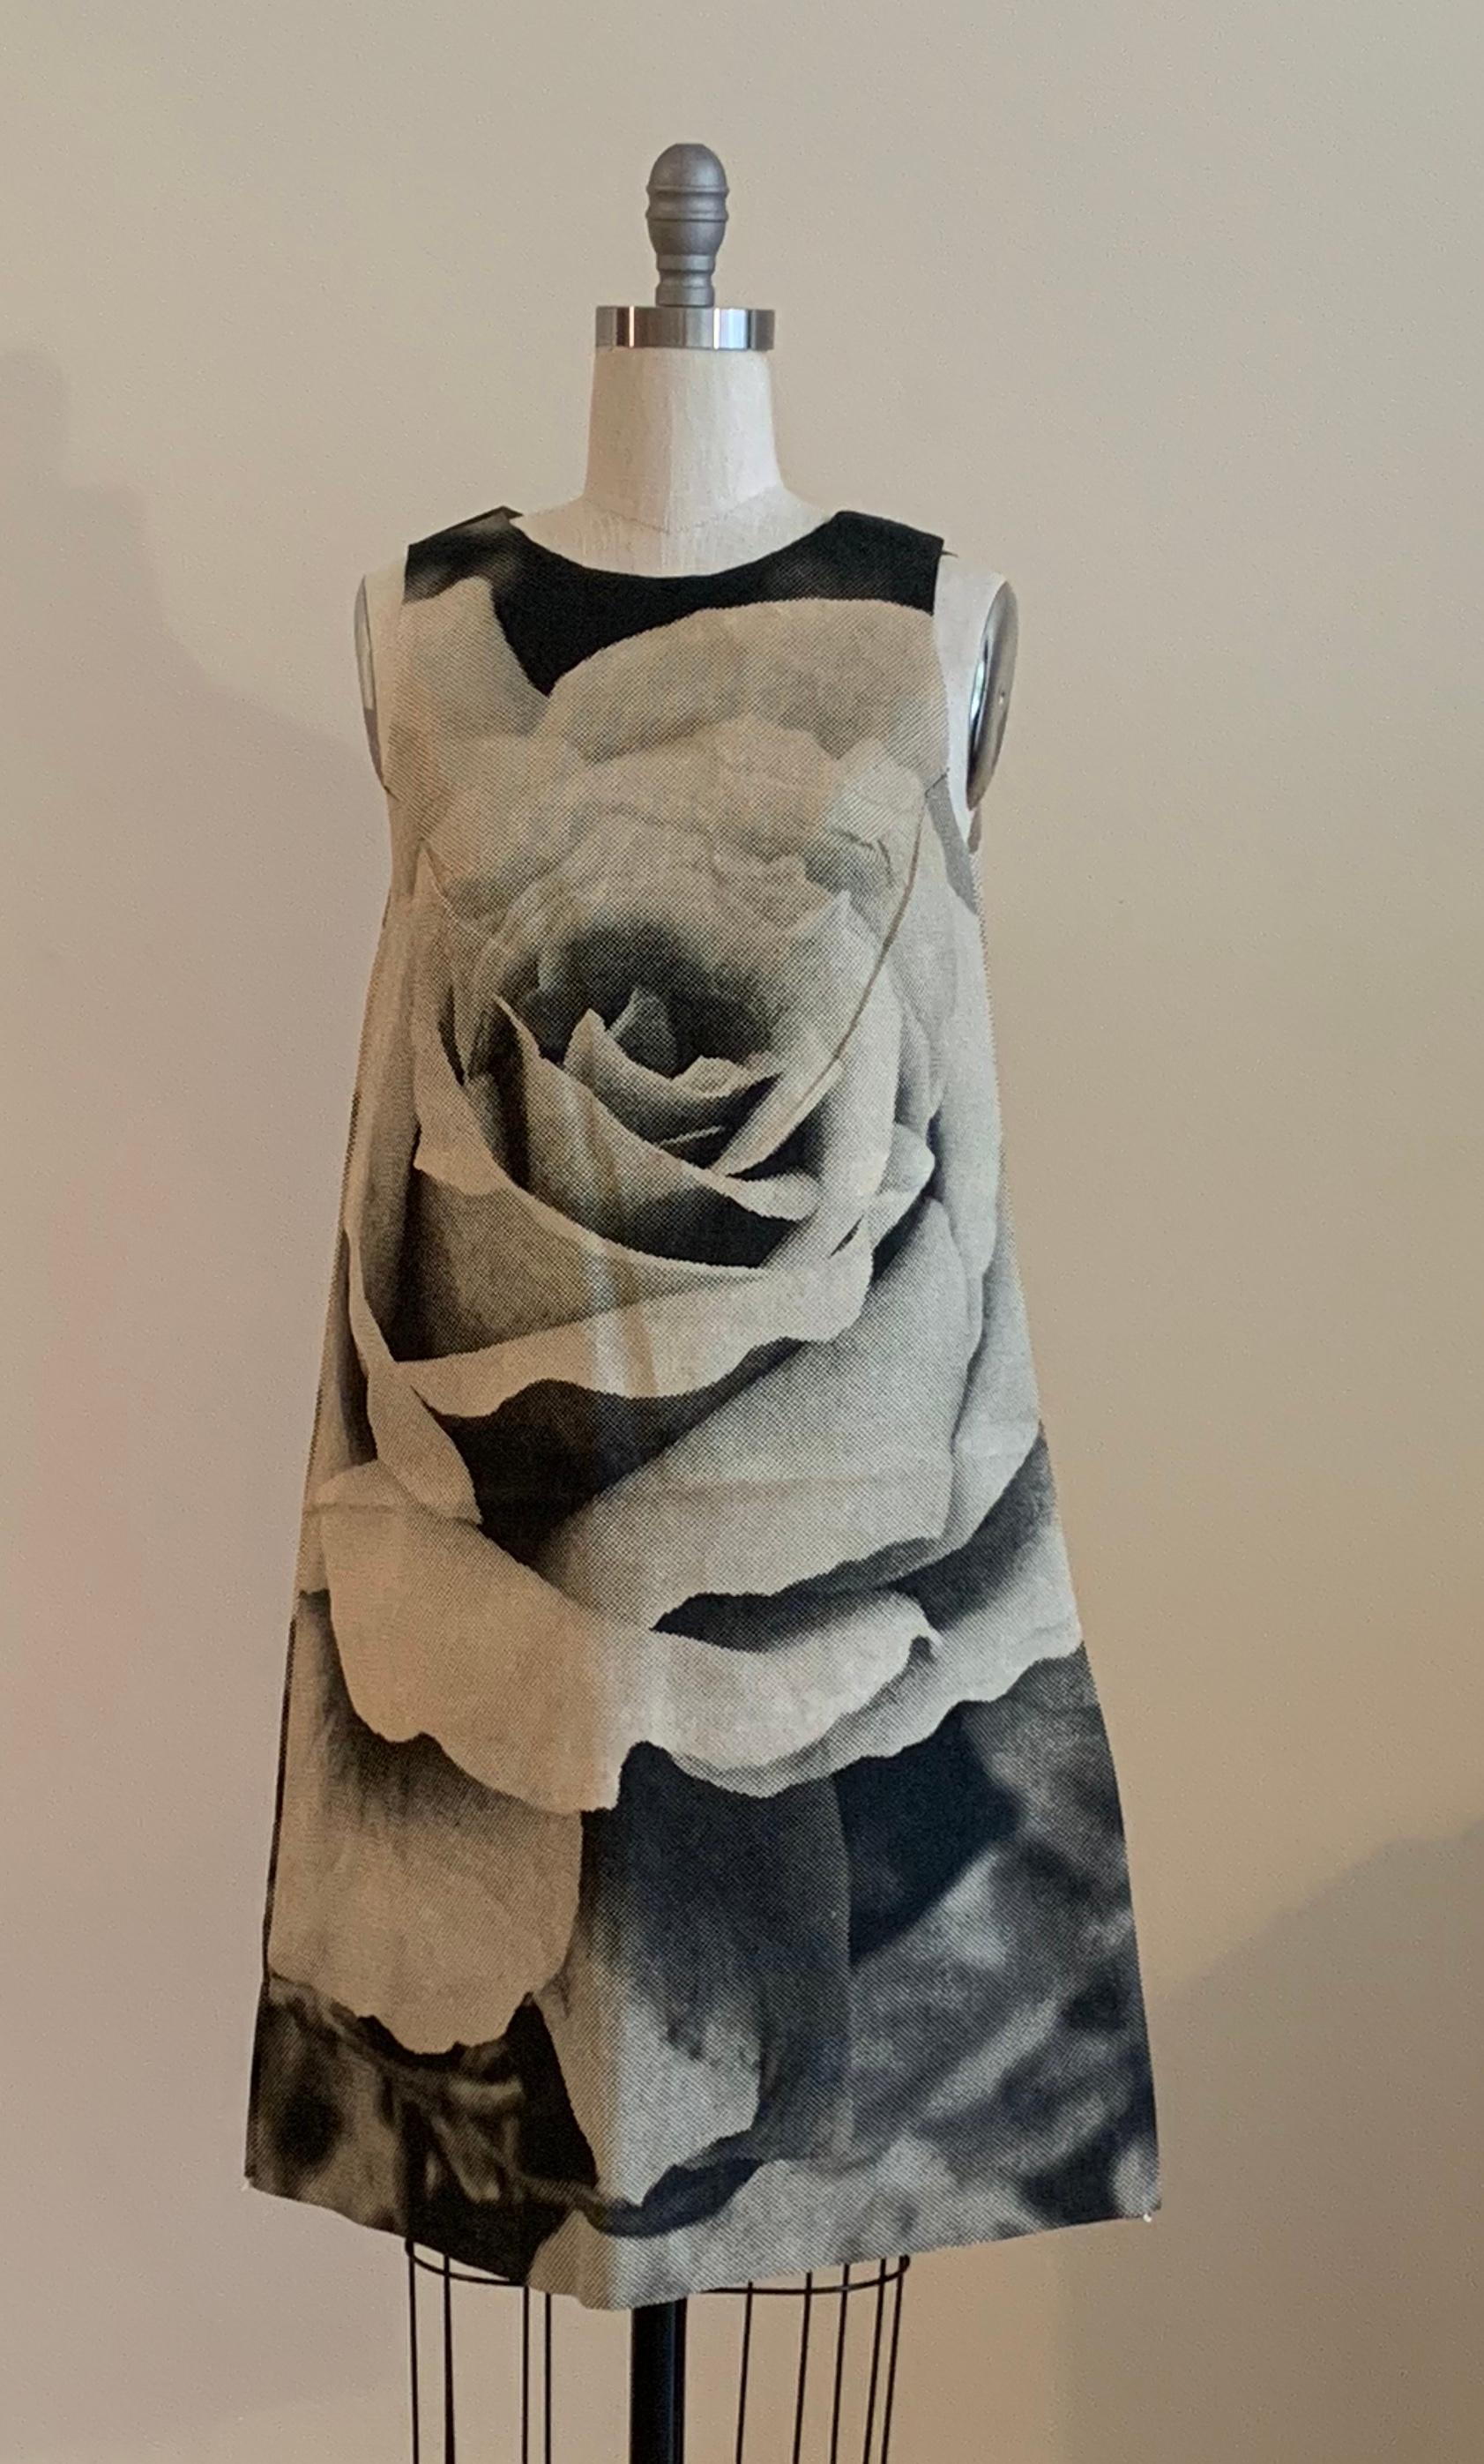 Iconic 1960's disposable paper rose dress by Harry Gordon. Black and white newspaper style poster print dress features a huge newspaper print rose. This dress is one of a set of five created by Gordon, and the dresses are featured in the collections